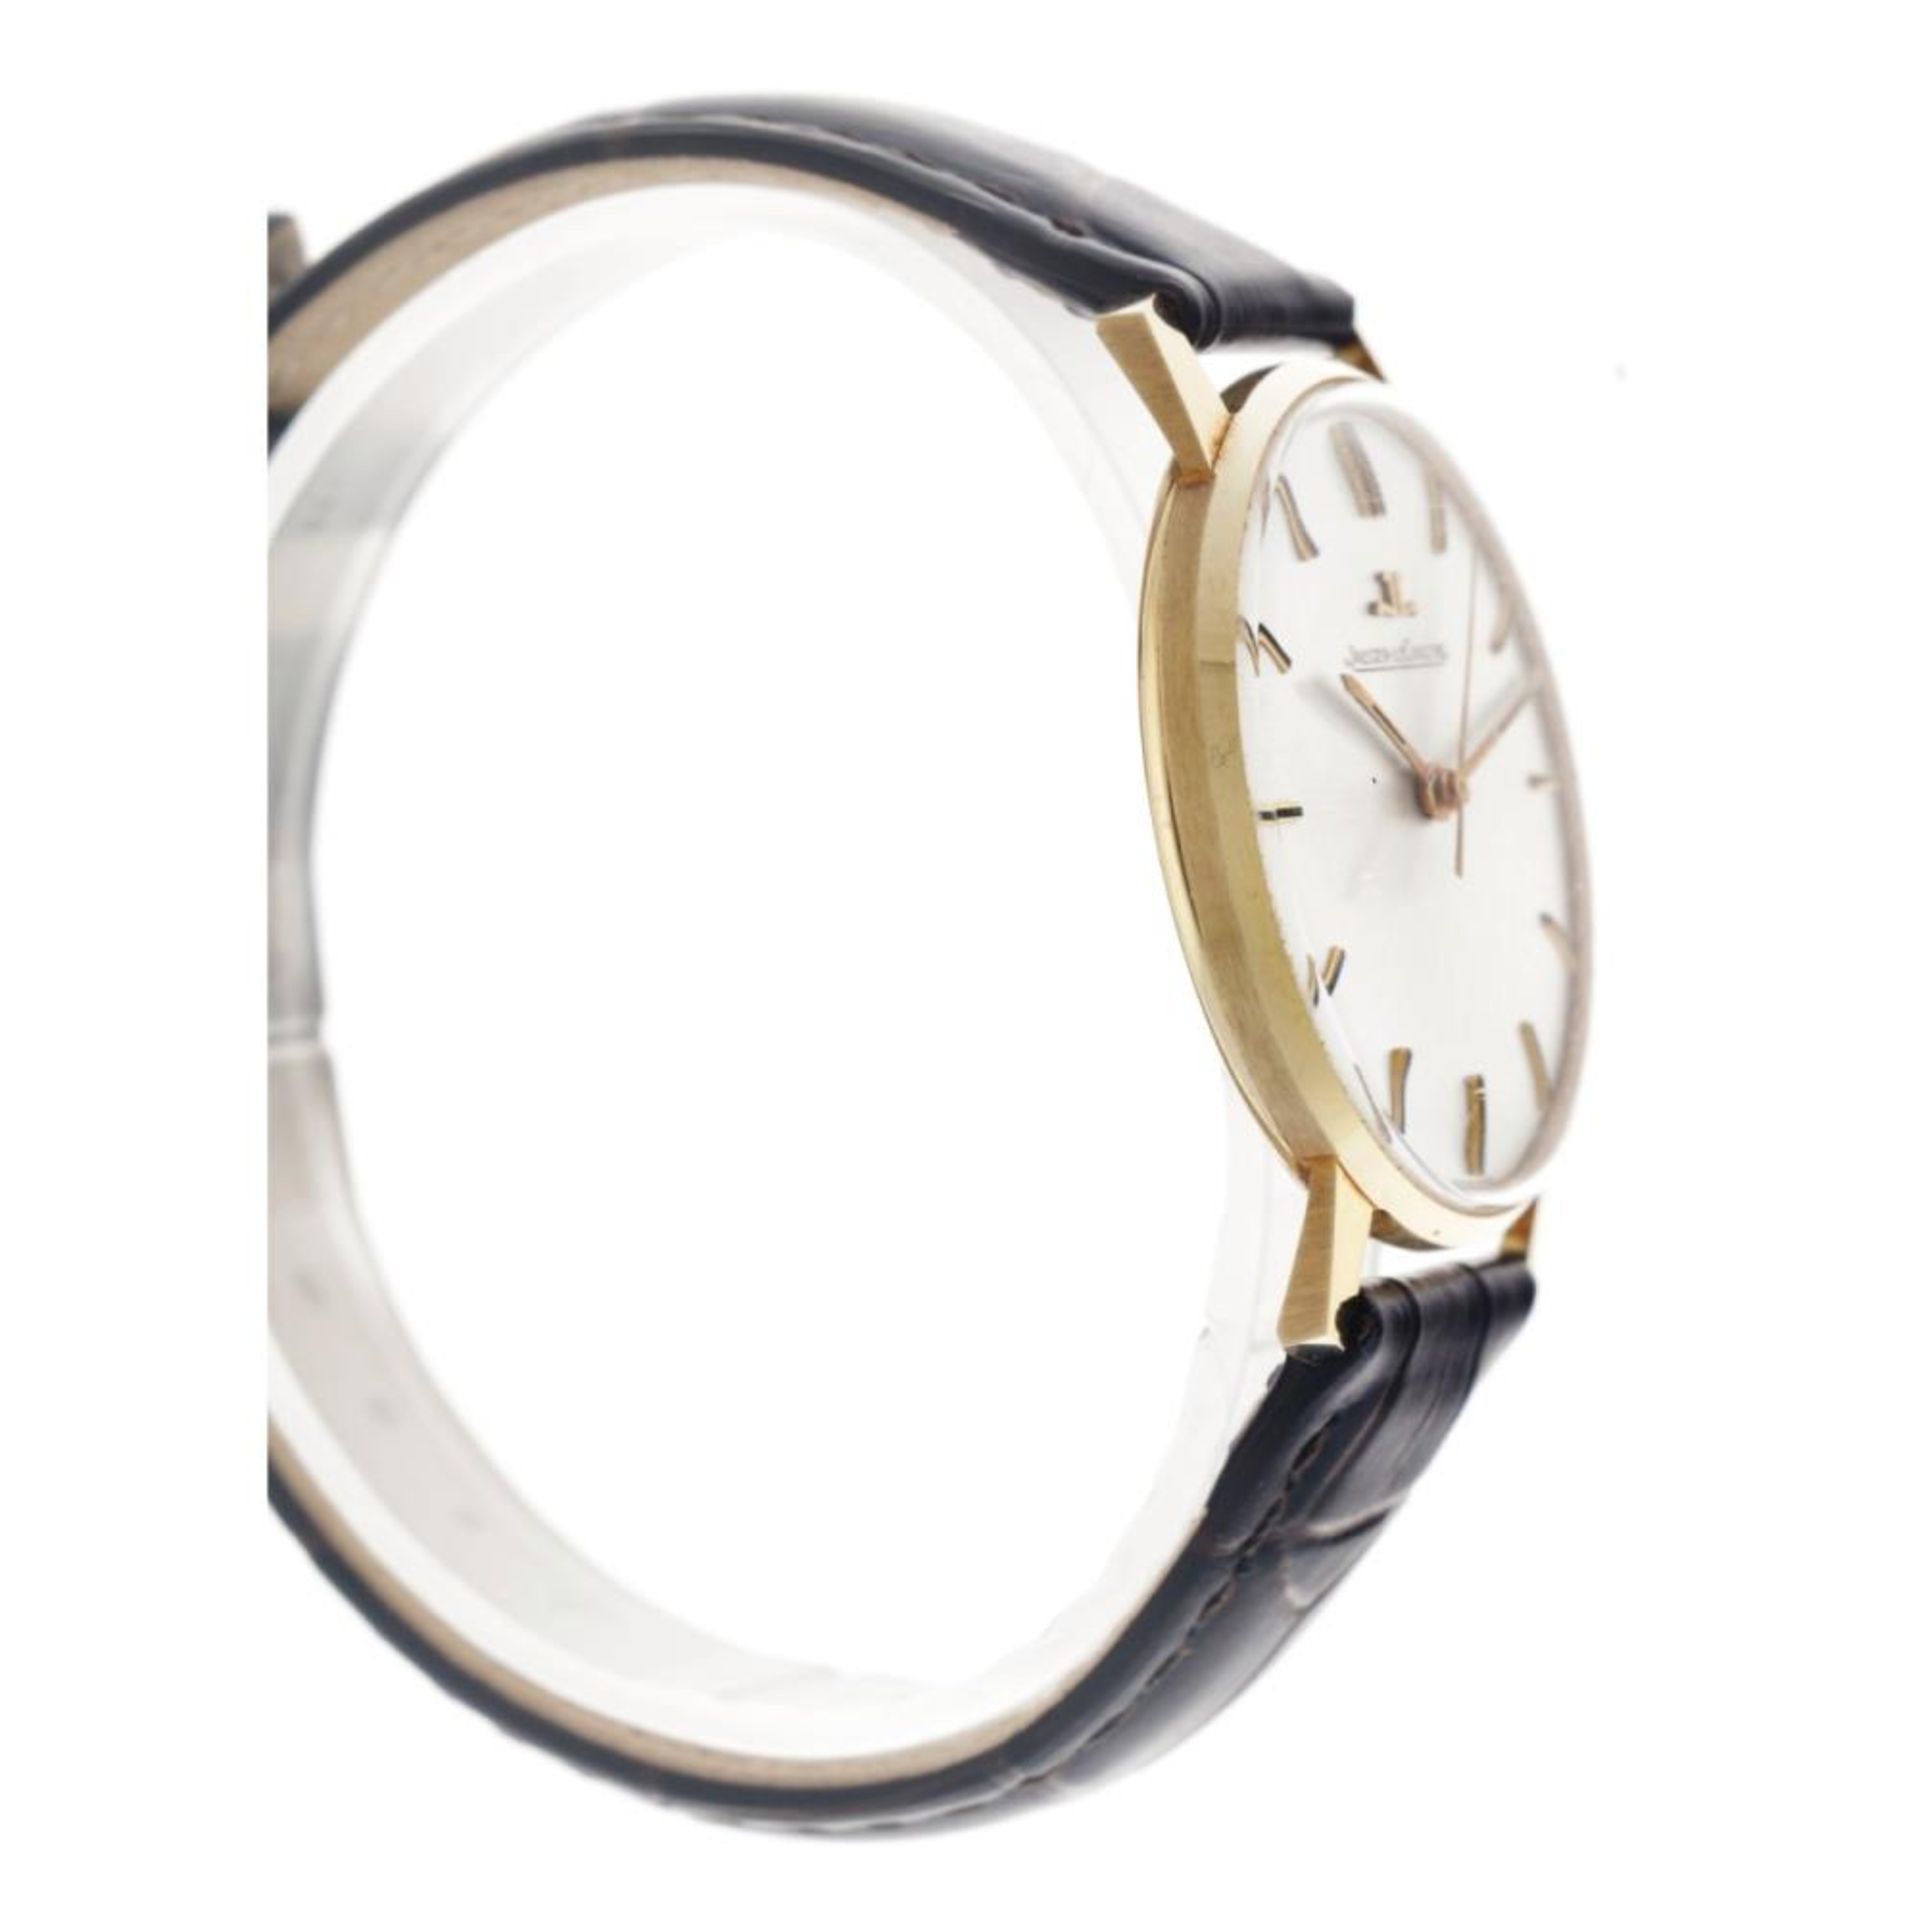 Jaeger-LeCoultre vintage dress watch 20007 -Men's watch - approx. 1965. - Image 8 of 10